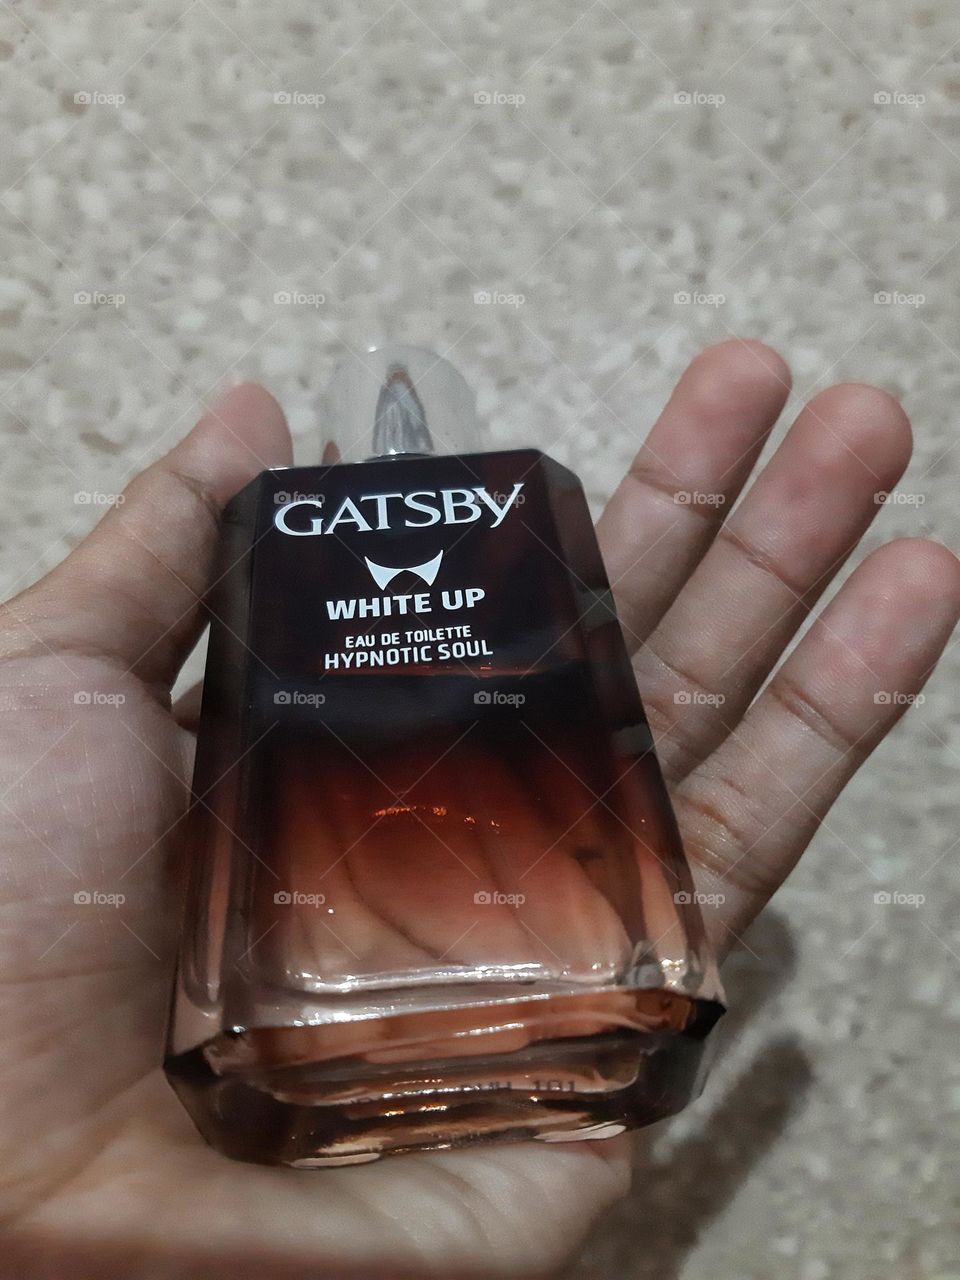 A body perfume glass bottle in a hand named Gatsby